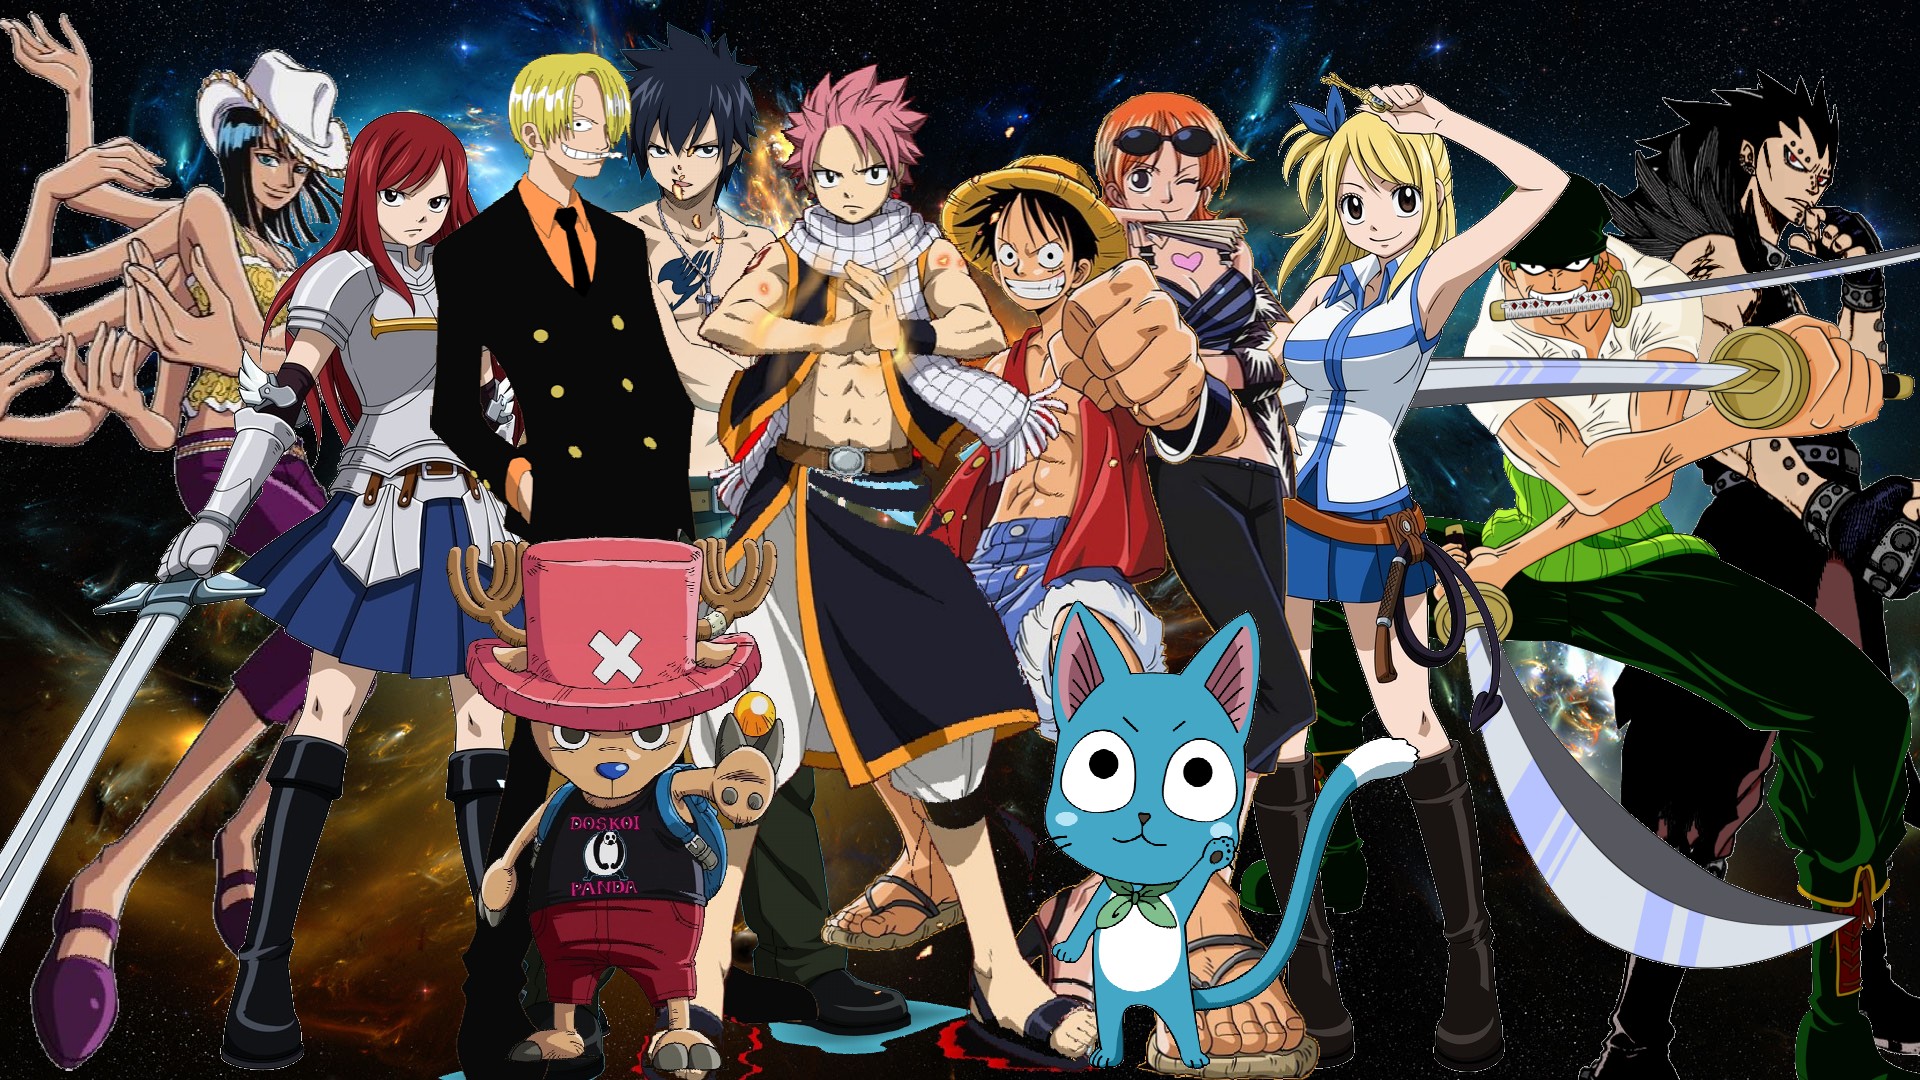 Fairy Tail X One Piece Crossover by Negator7 on